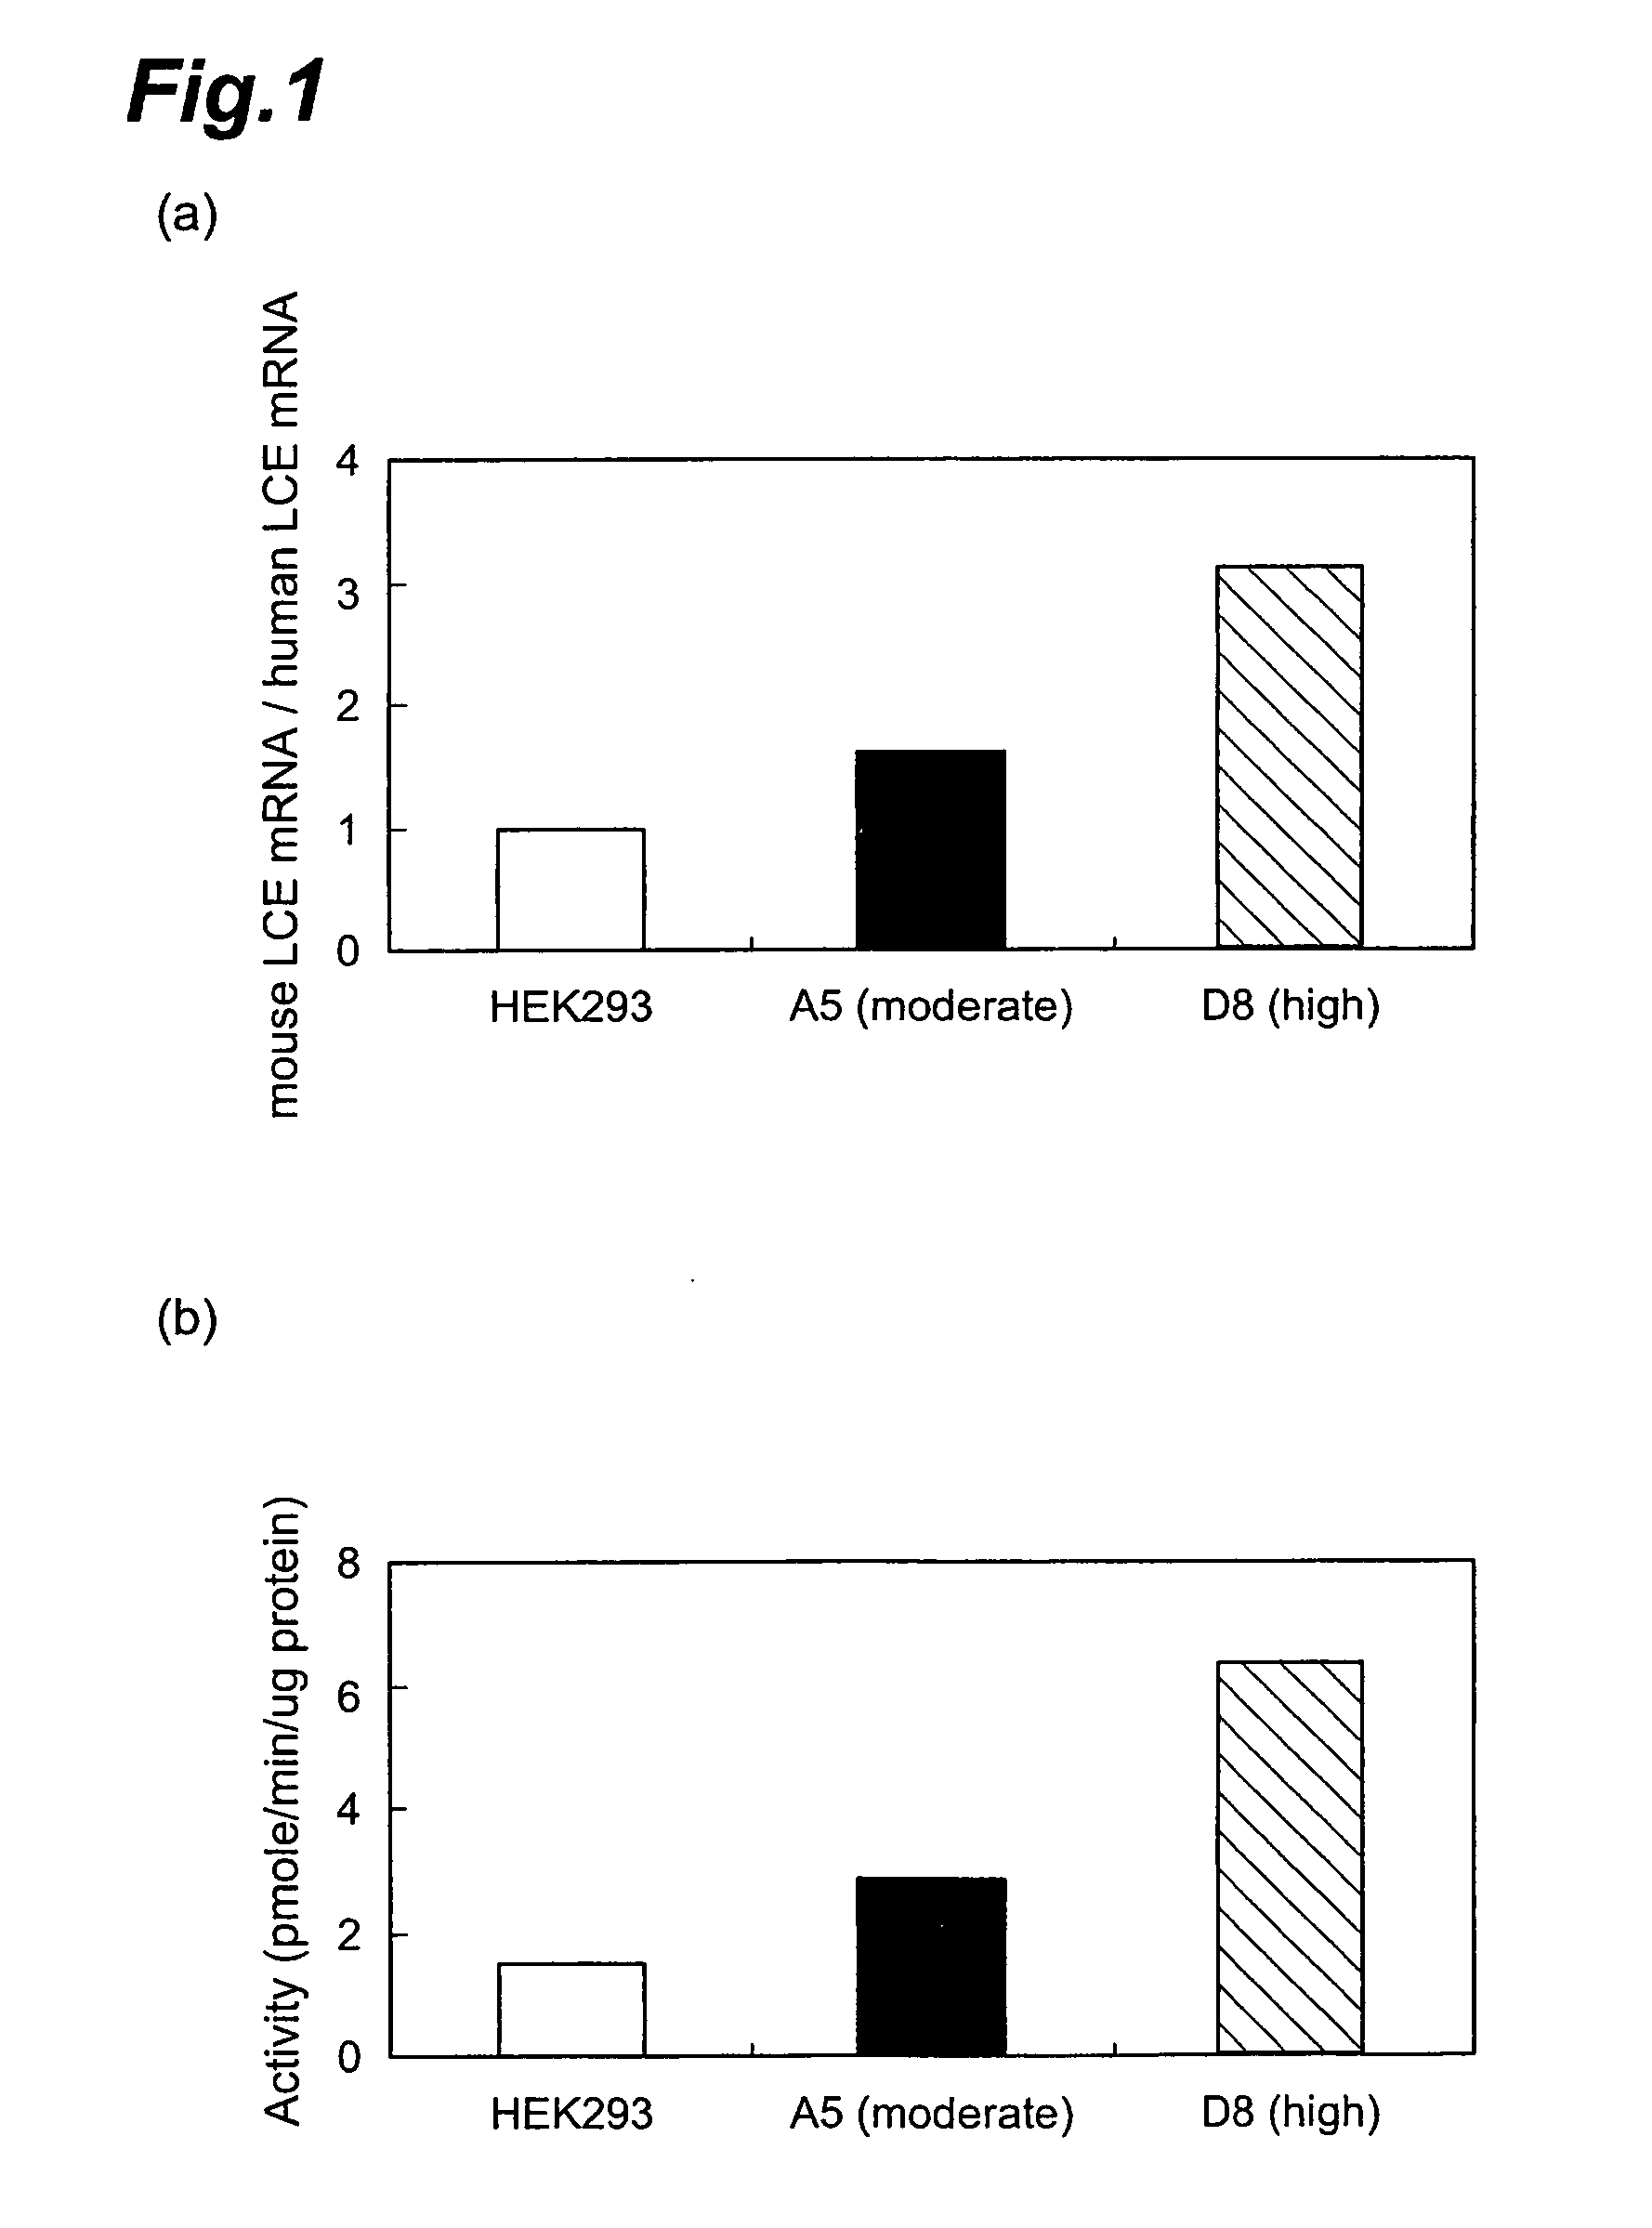 Method of evaluating compound efficacious in treating obesity